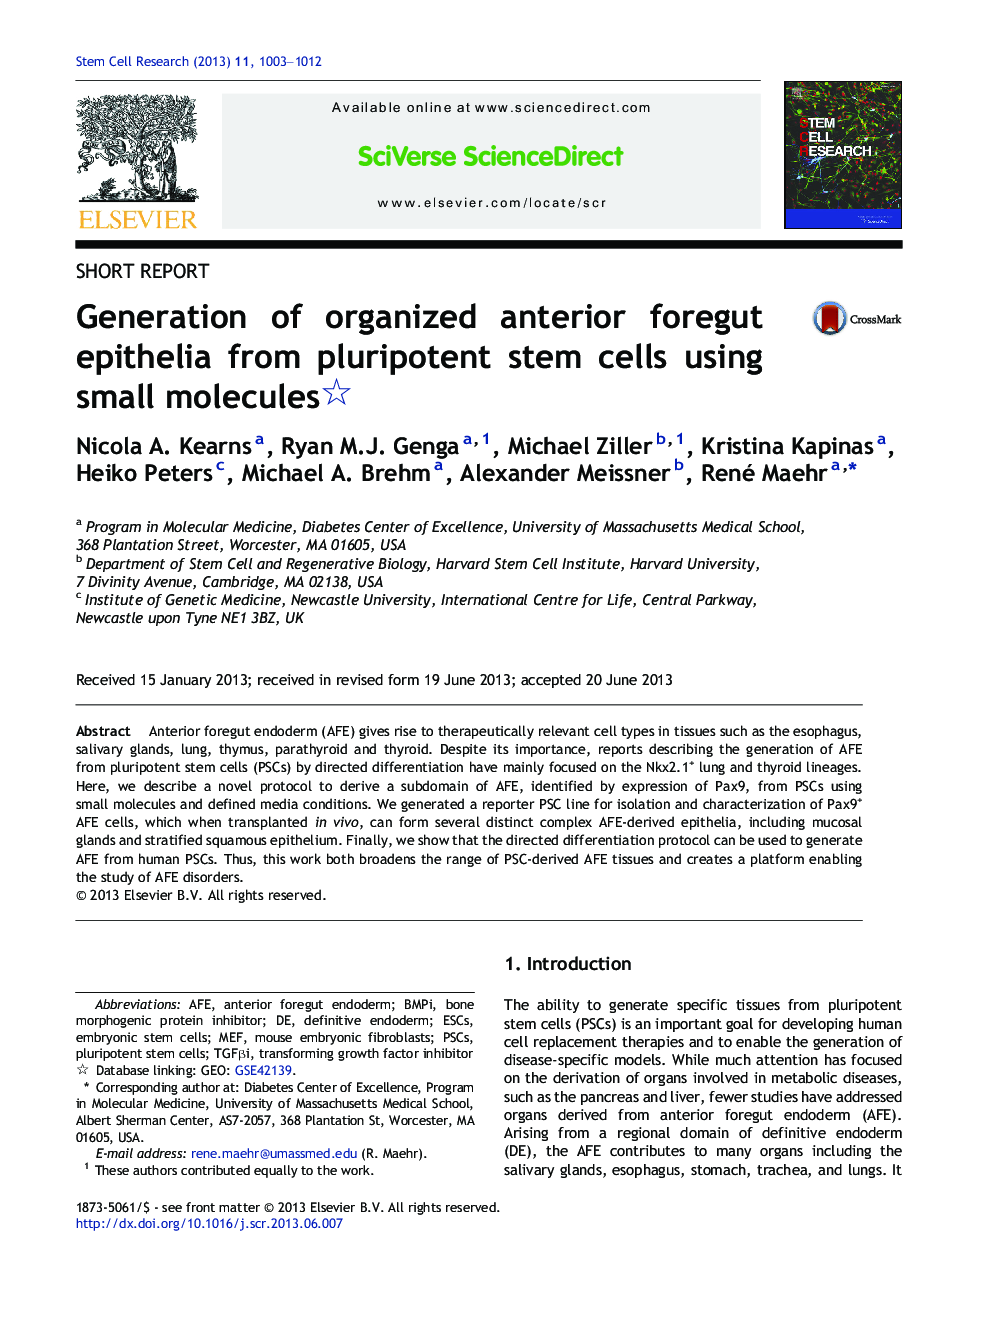 Generation of organized anterior foregut epithelia from pluripotent stem cells using small molecules